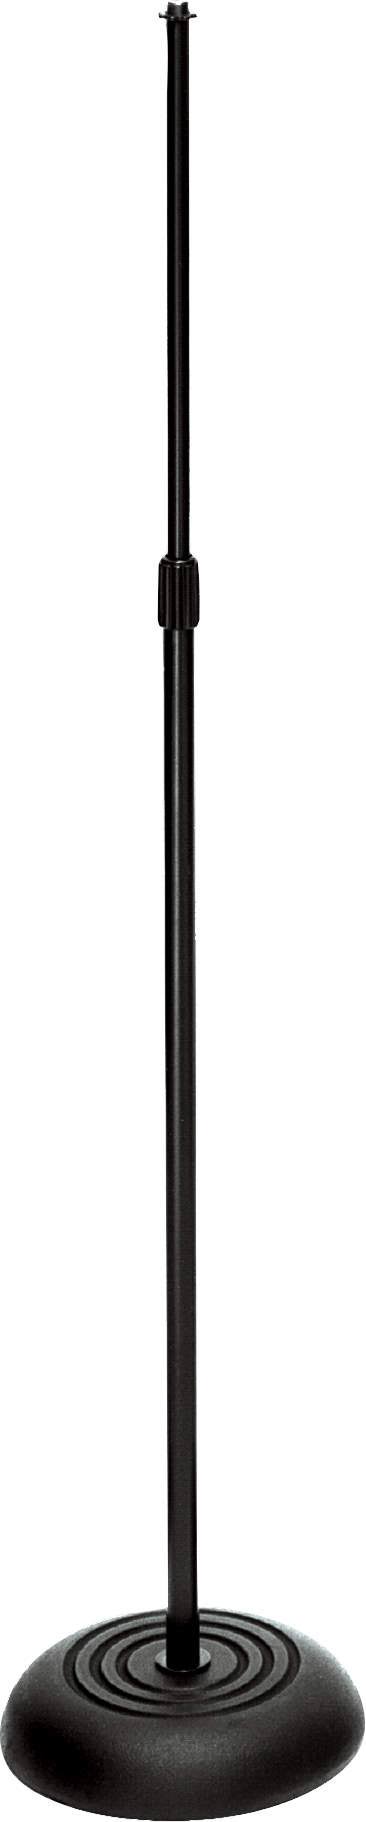 On Stage Ms7201b Round Base Microphone Stand - Black